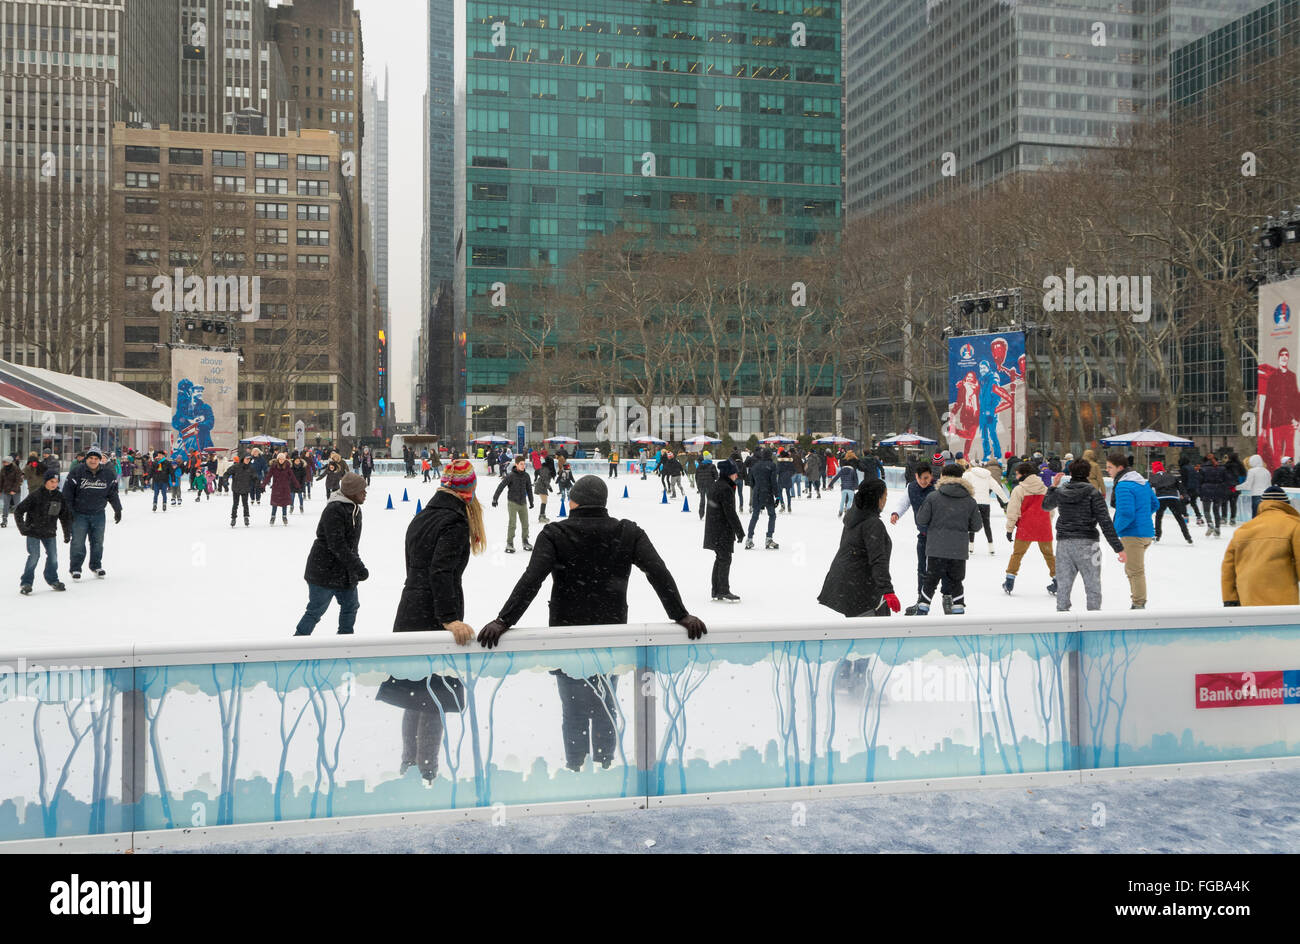 People ice skating in the snow at the Bryant Park Winter Village outdoors ice rink in New York City Stock Photo